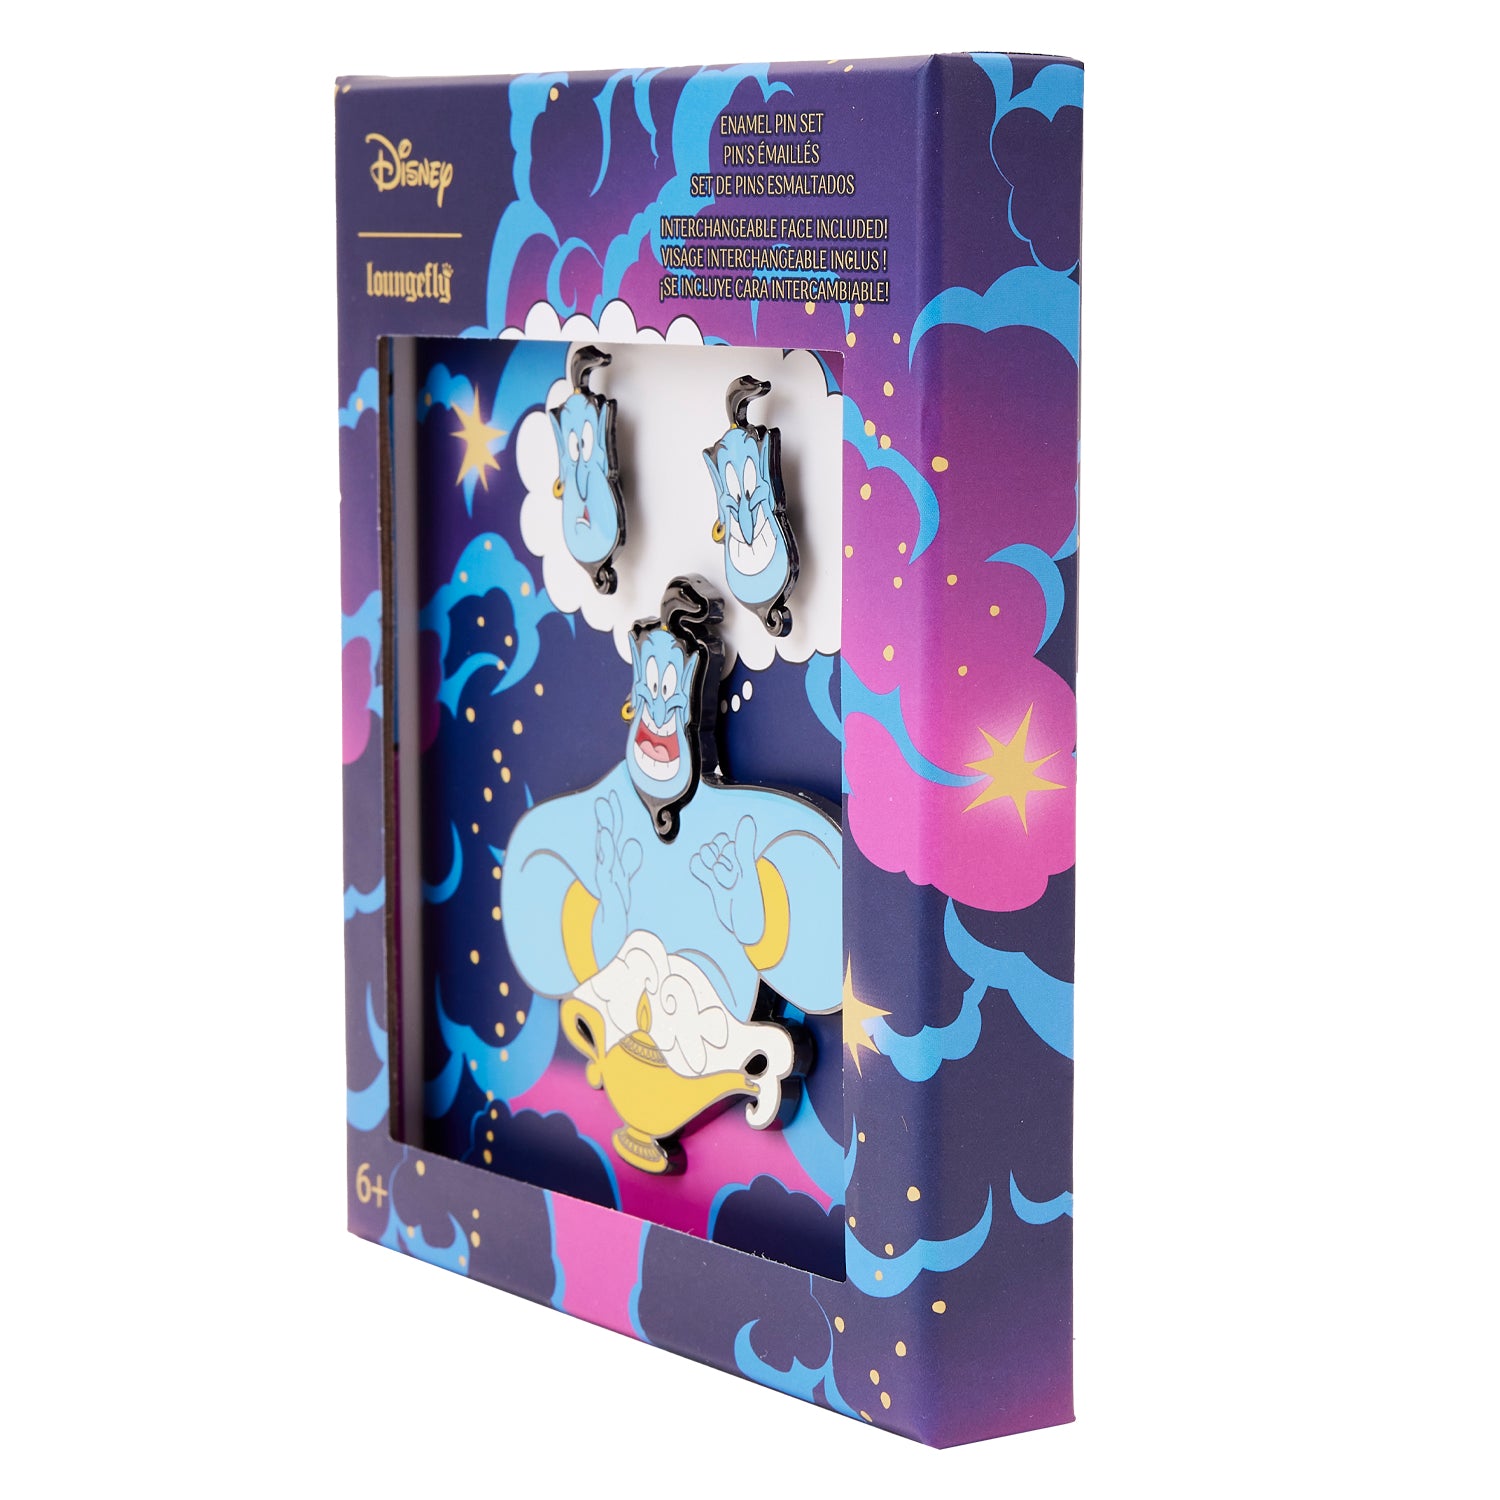 Aladdin's Genie Pin Trading Book Bag for Disney Pin Collections